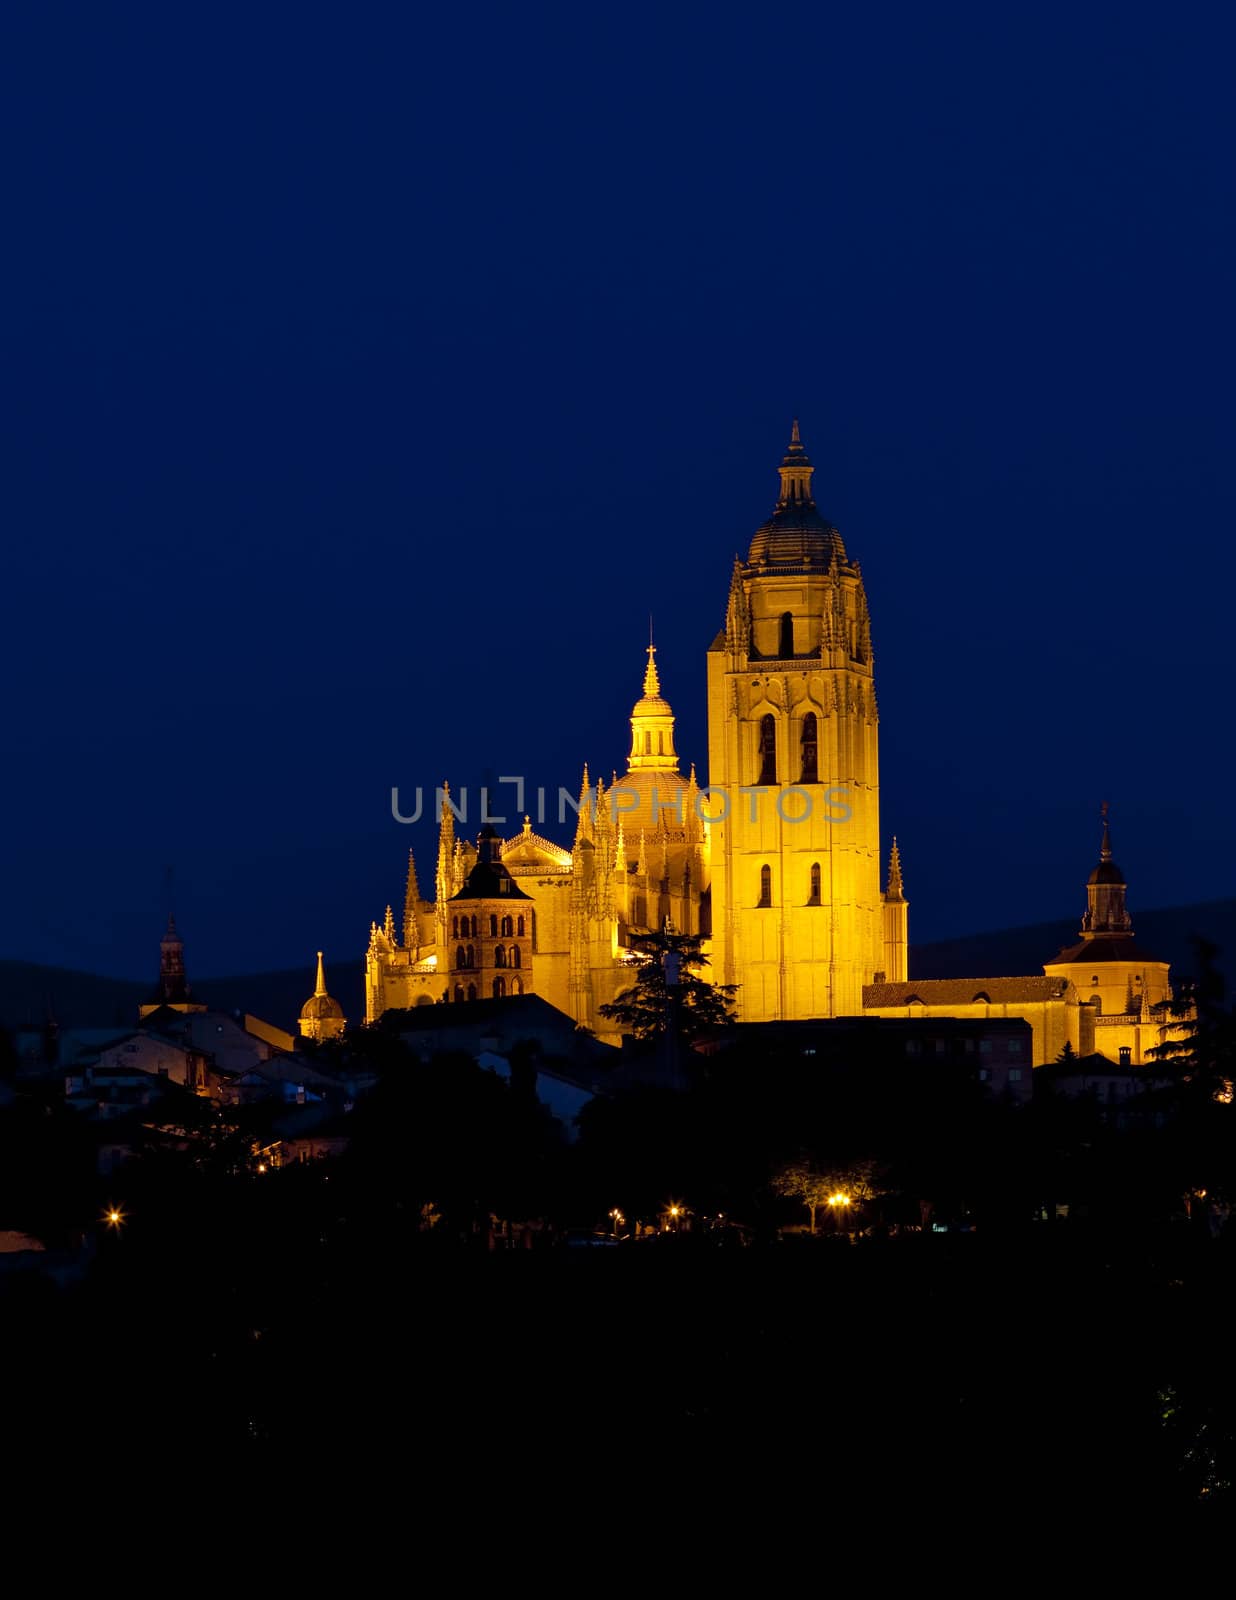 Segovia at night, Castile and Leon, Spain by phbcz